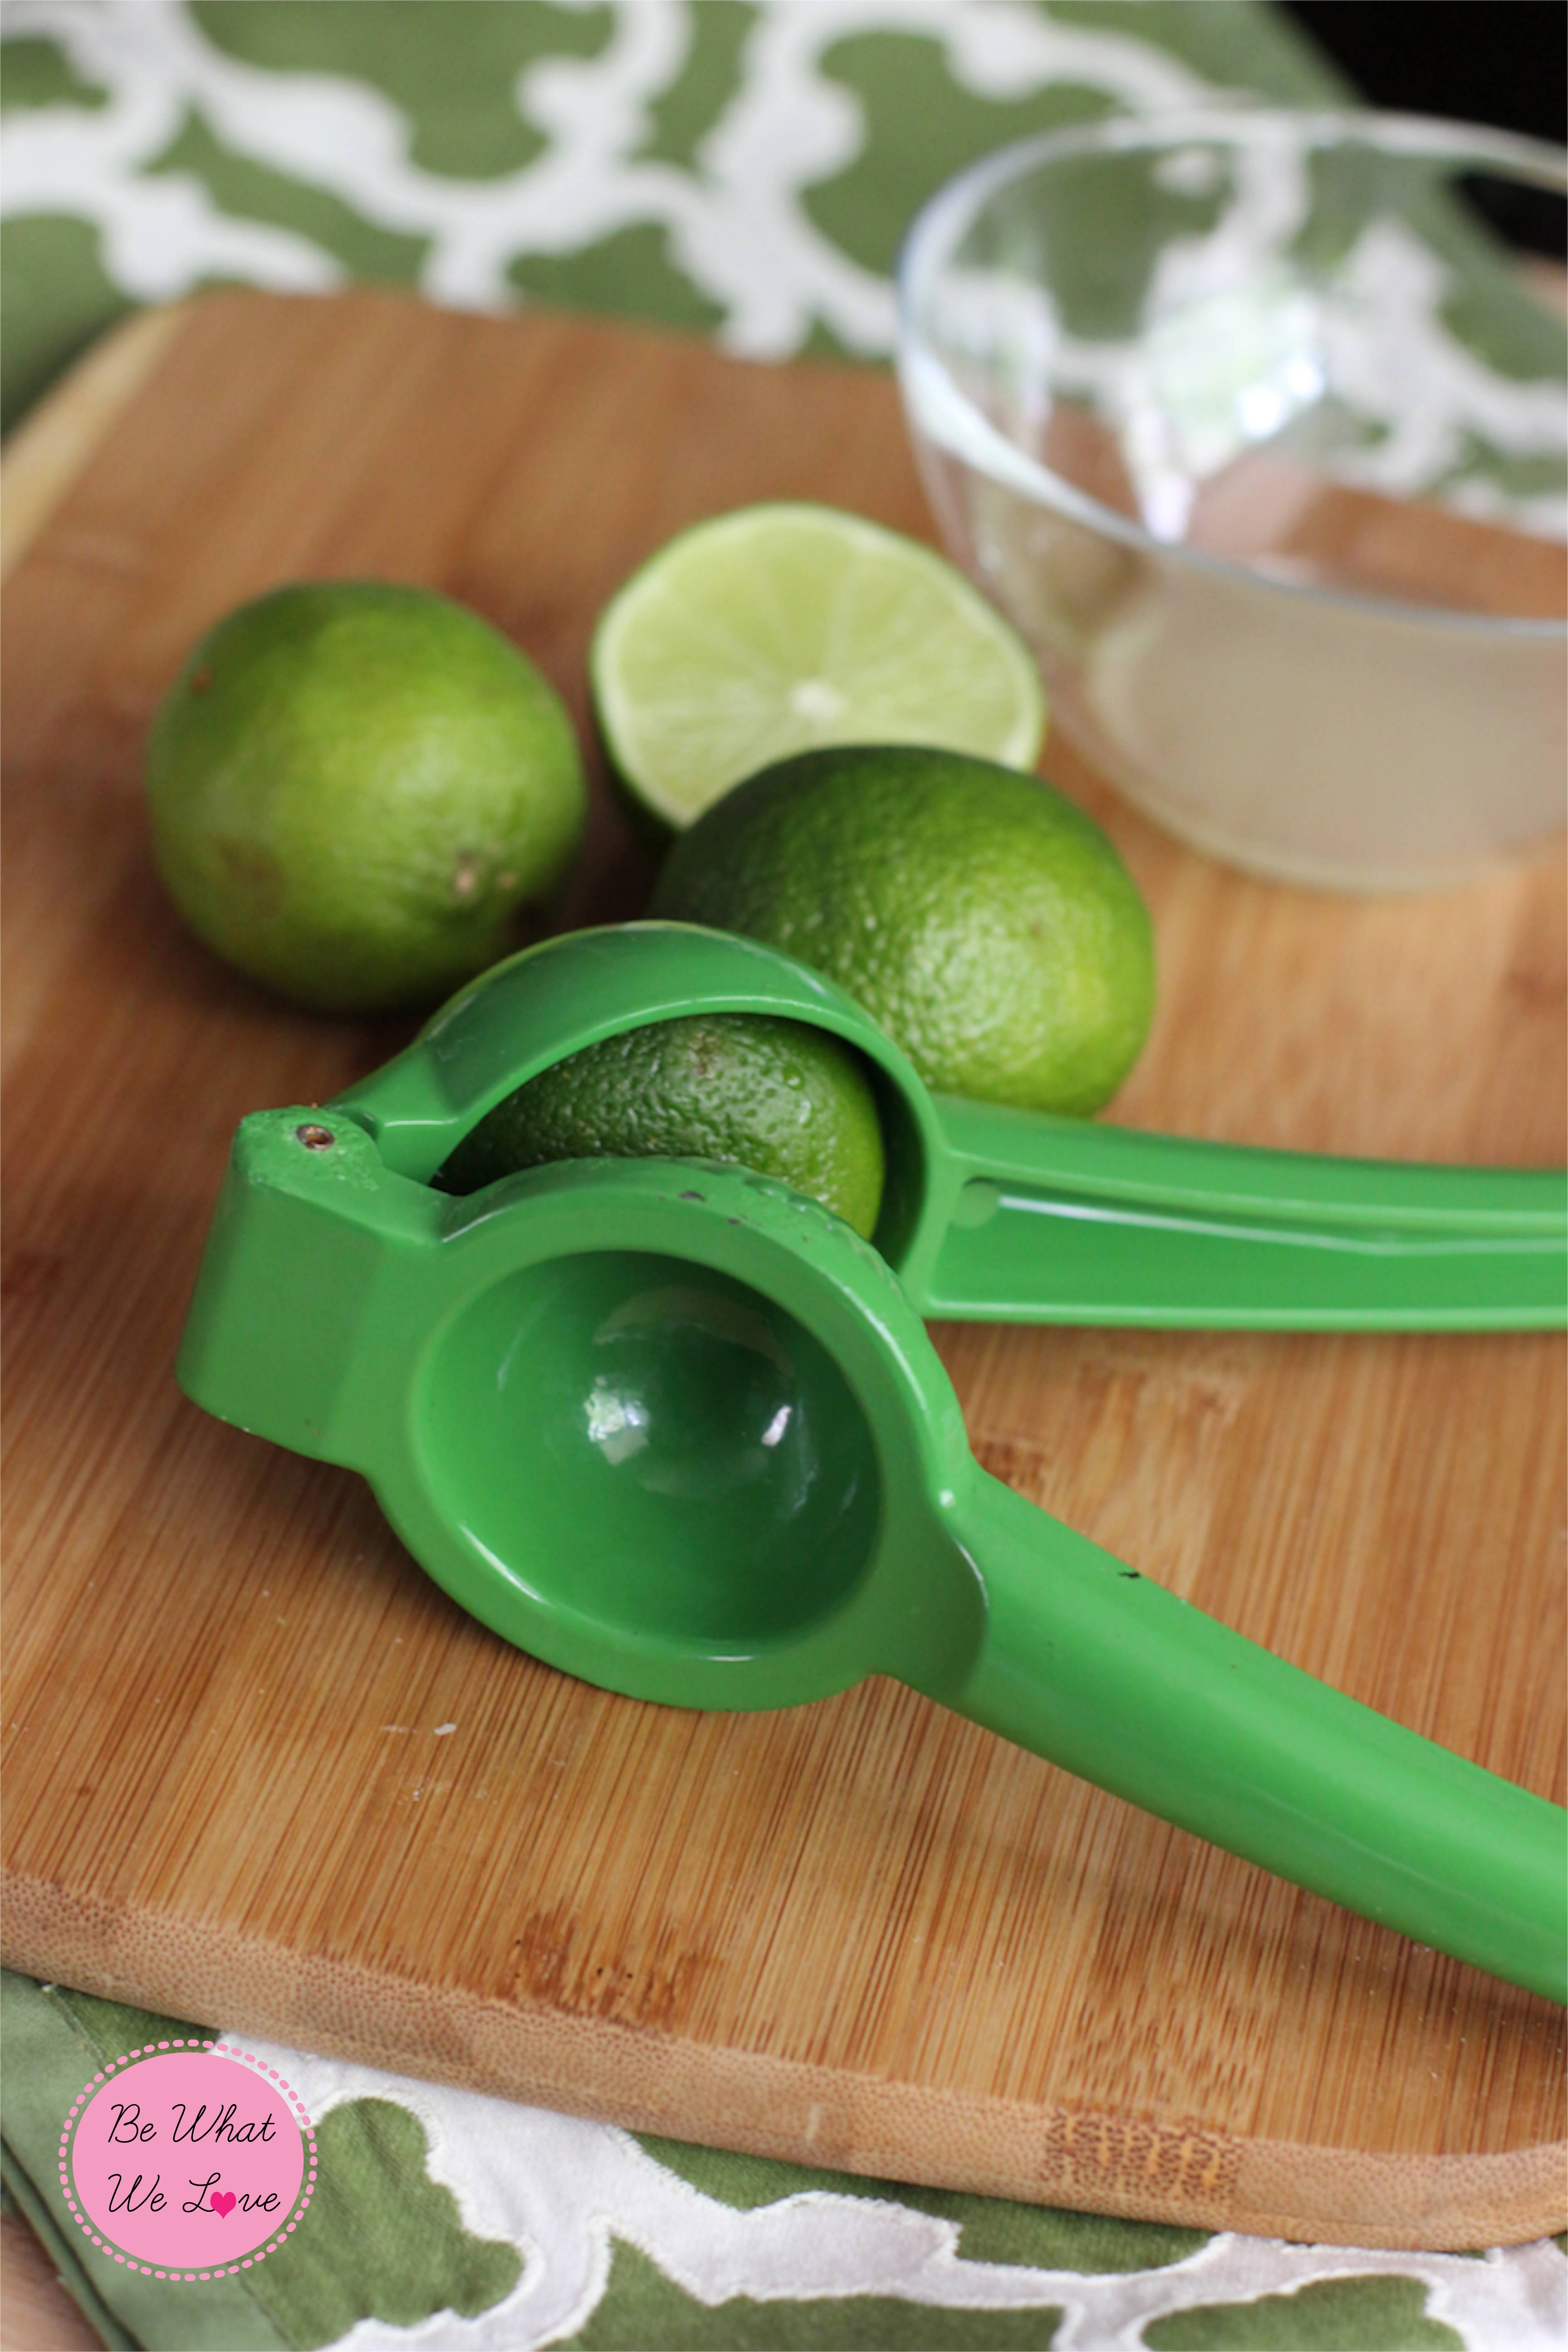 Freshly squeezed lime juice